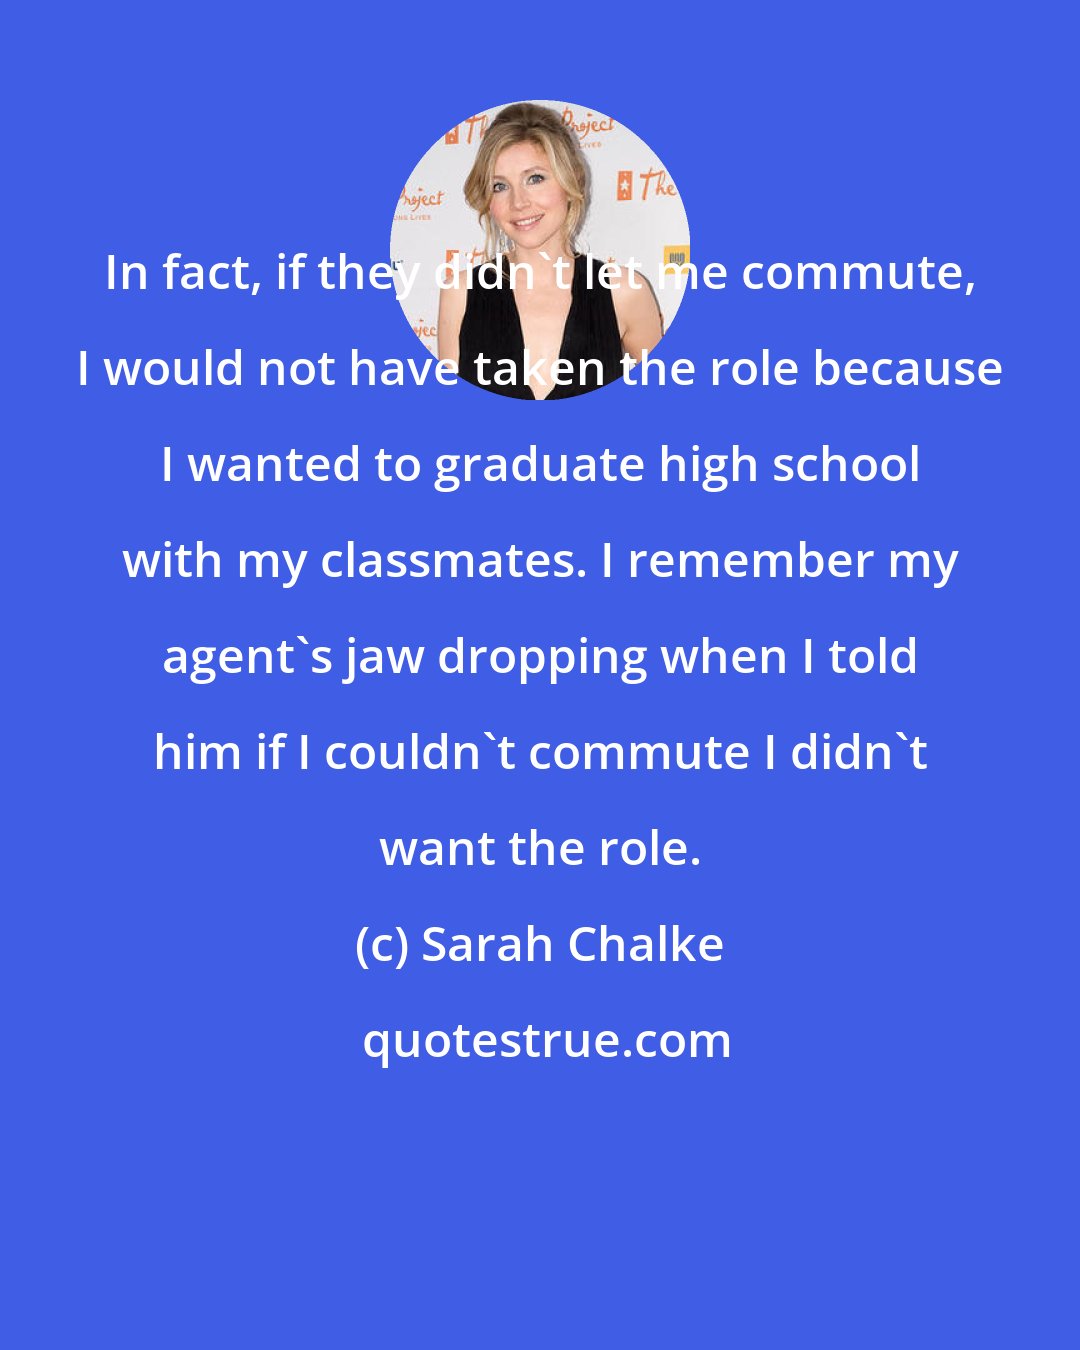 Sarah Chalke: In fact, if they didn't let me commute, I would not have taken the role because I wanted to graduate high school with my classmates. I remember my agent's jaw dropping when I told him if I couldn't commute I didn't want the role.